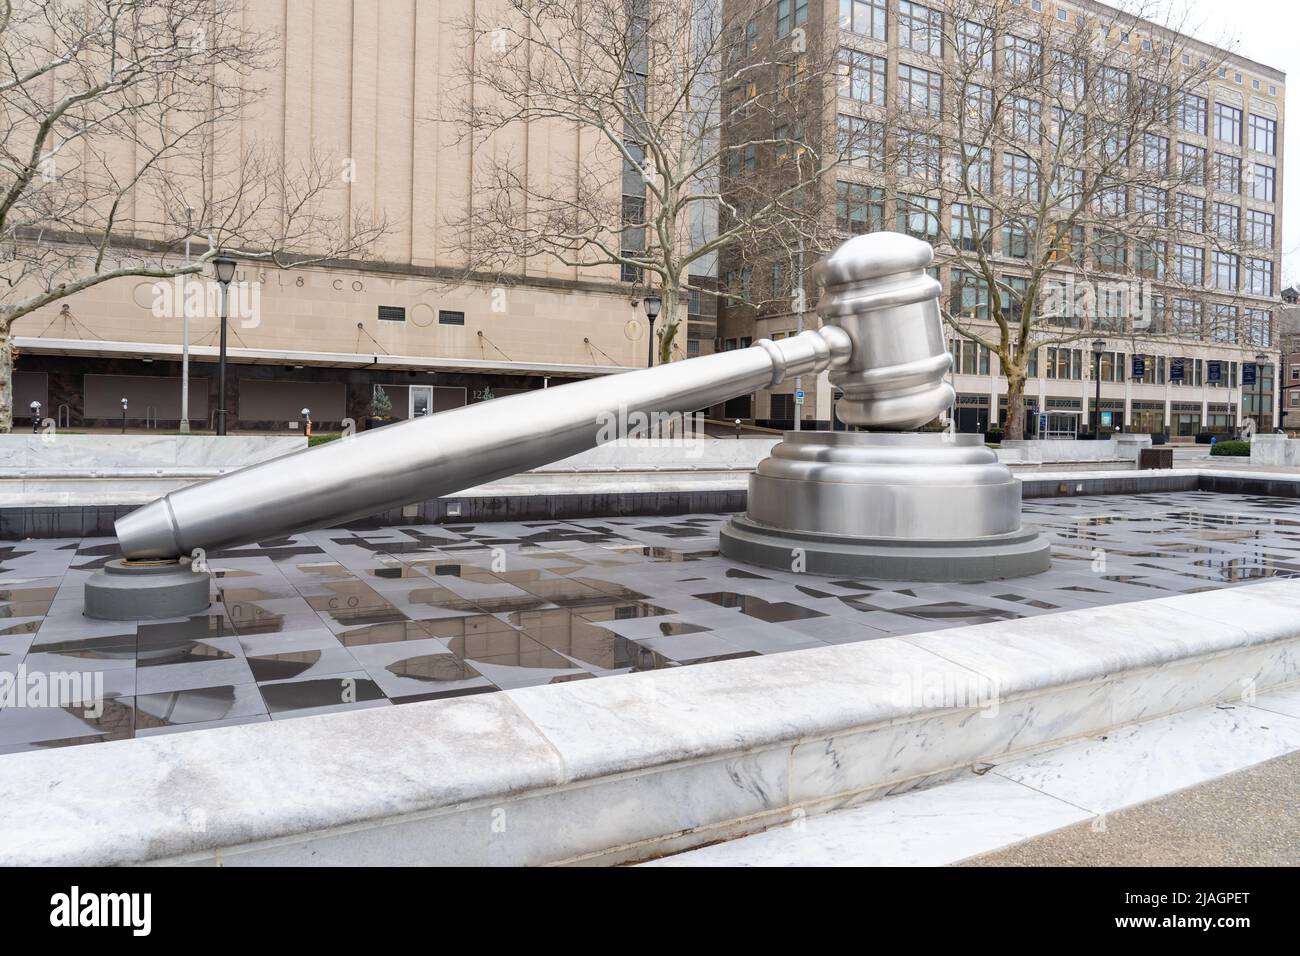 Columbus, Ohio, USA - December 27, 2021: Gavel sculpture created by Andrew Scott located in the courtyard of the Ohio Judicial Center Stock Photo